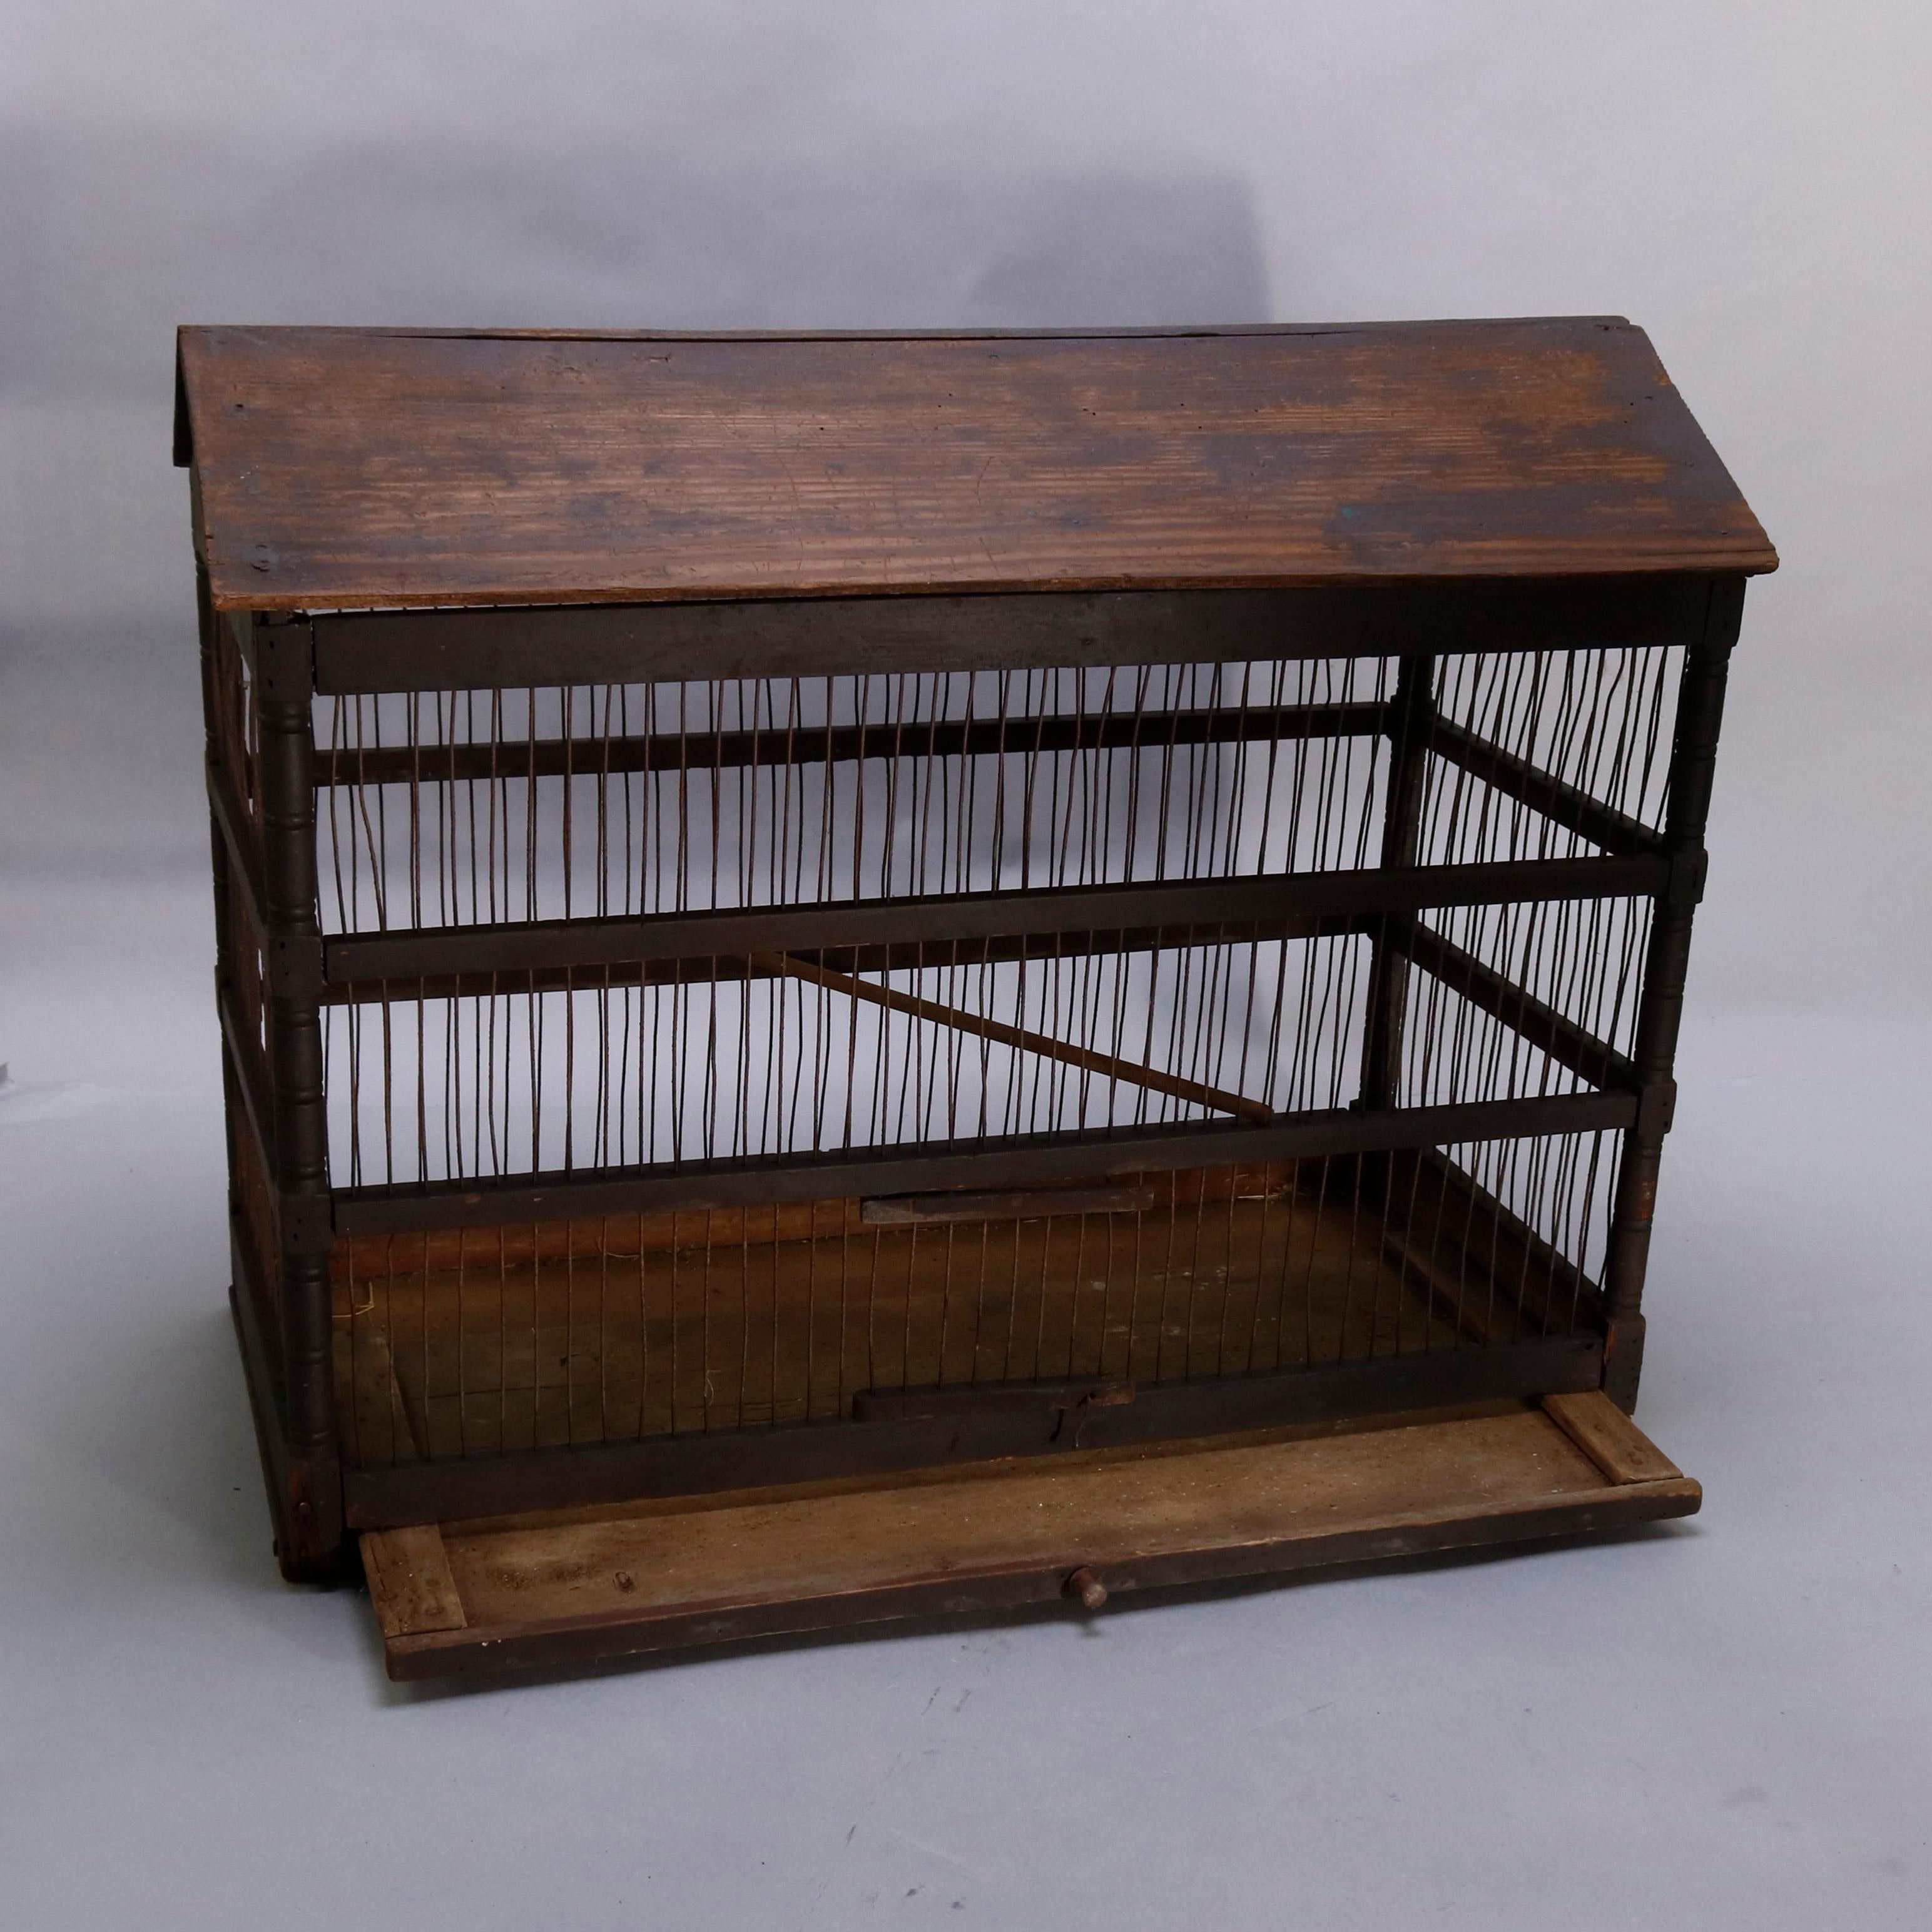 An antique Americana Folk Art bird cage offers wood construction in house form with door and pullout / pull-out tray and having wire caging, circa 1860

Measures: 22.25